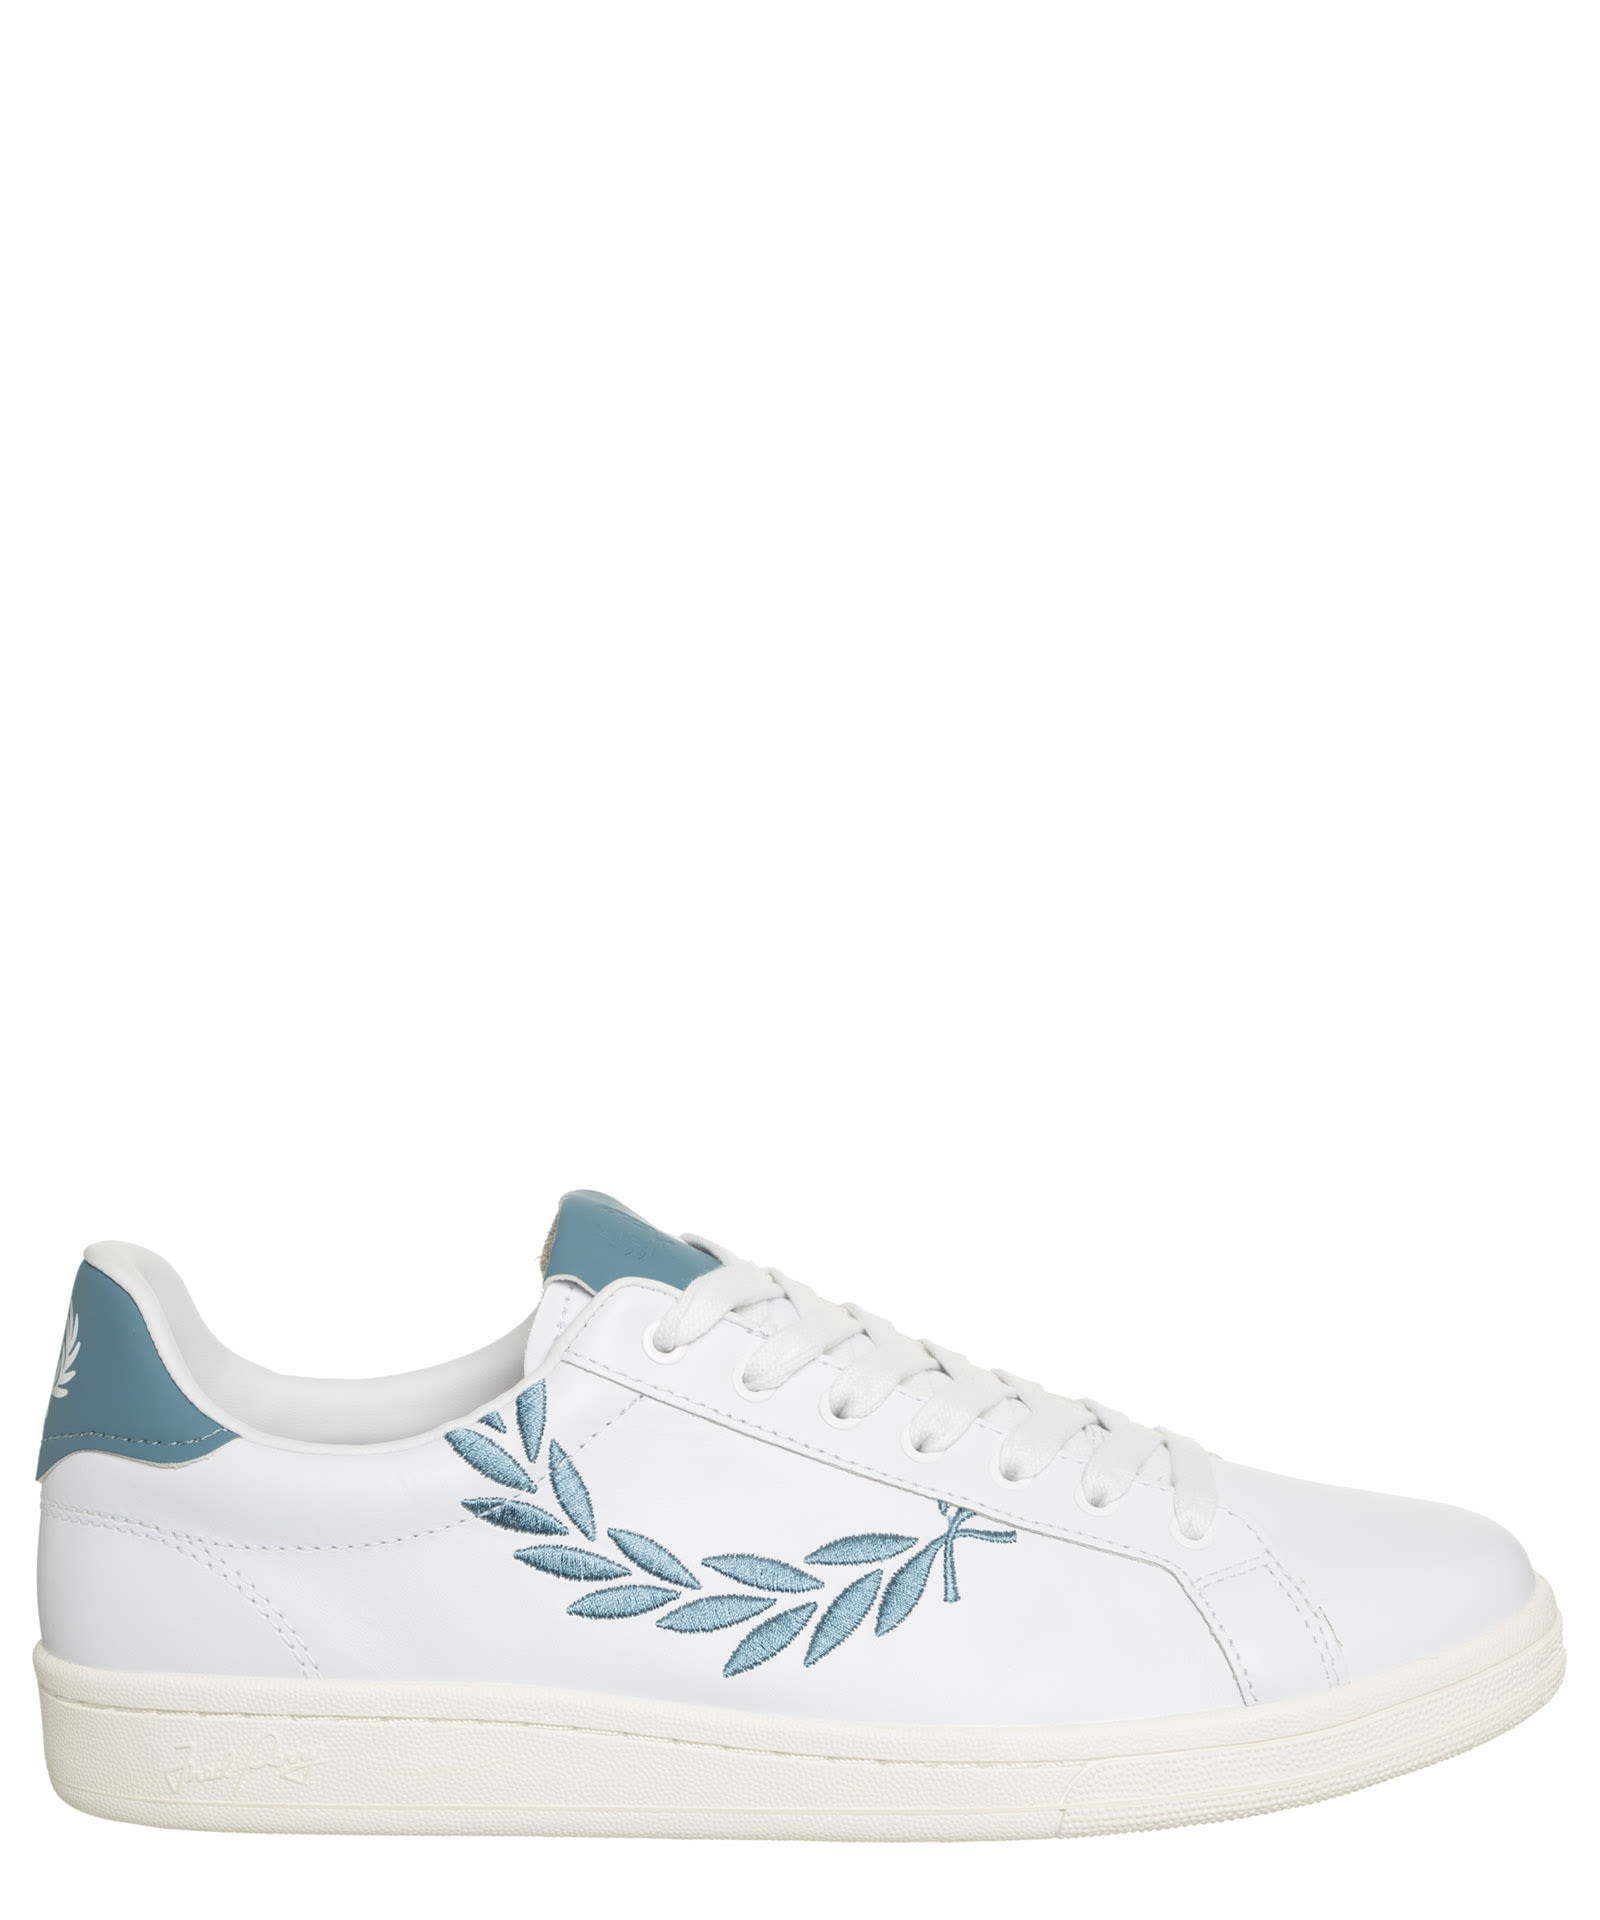 FRED PERRY B721 LEATHER SNEAKERS